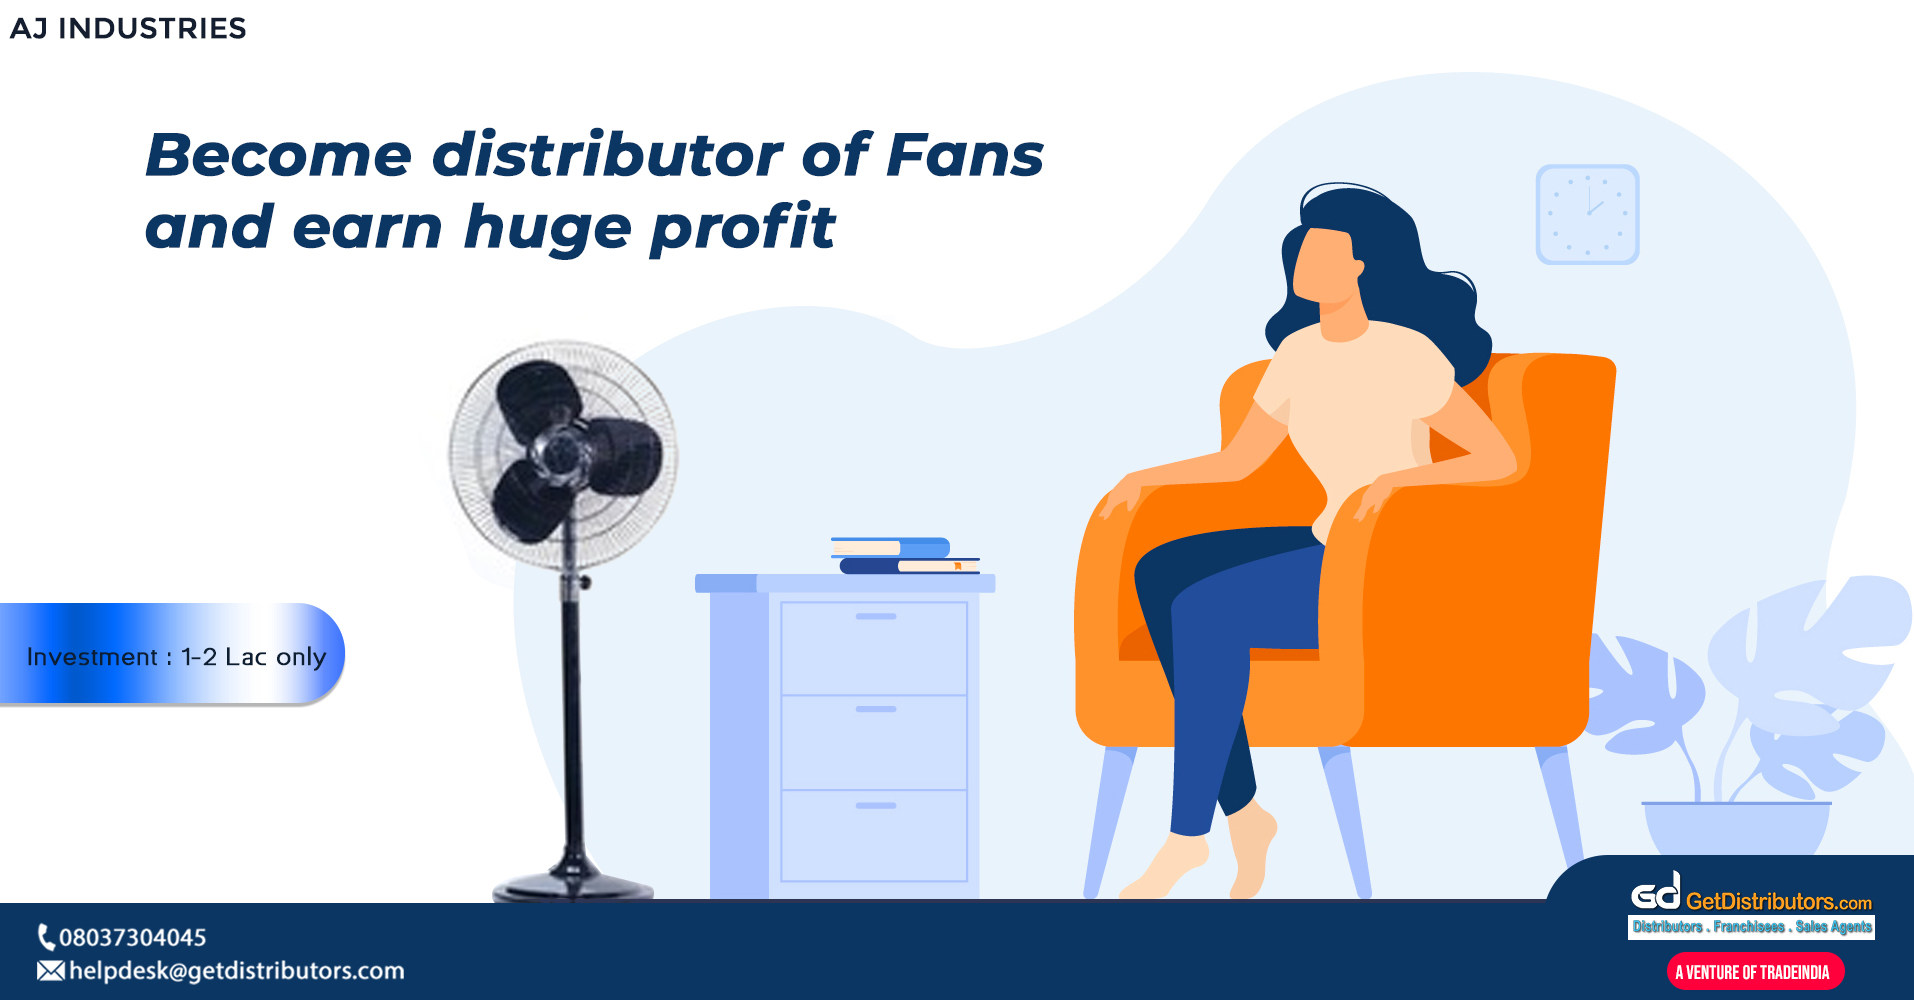 Best-in-class fans for distribution